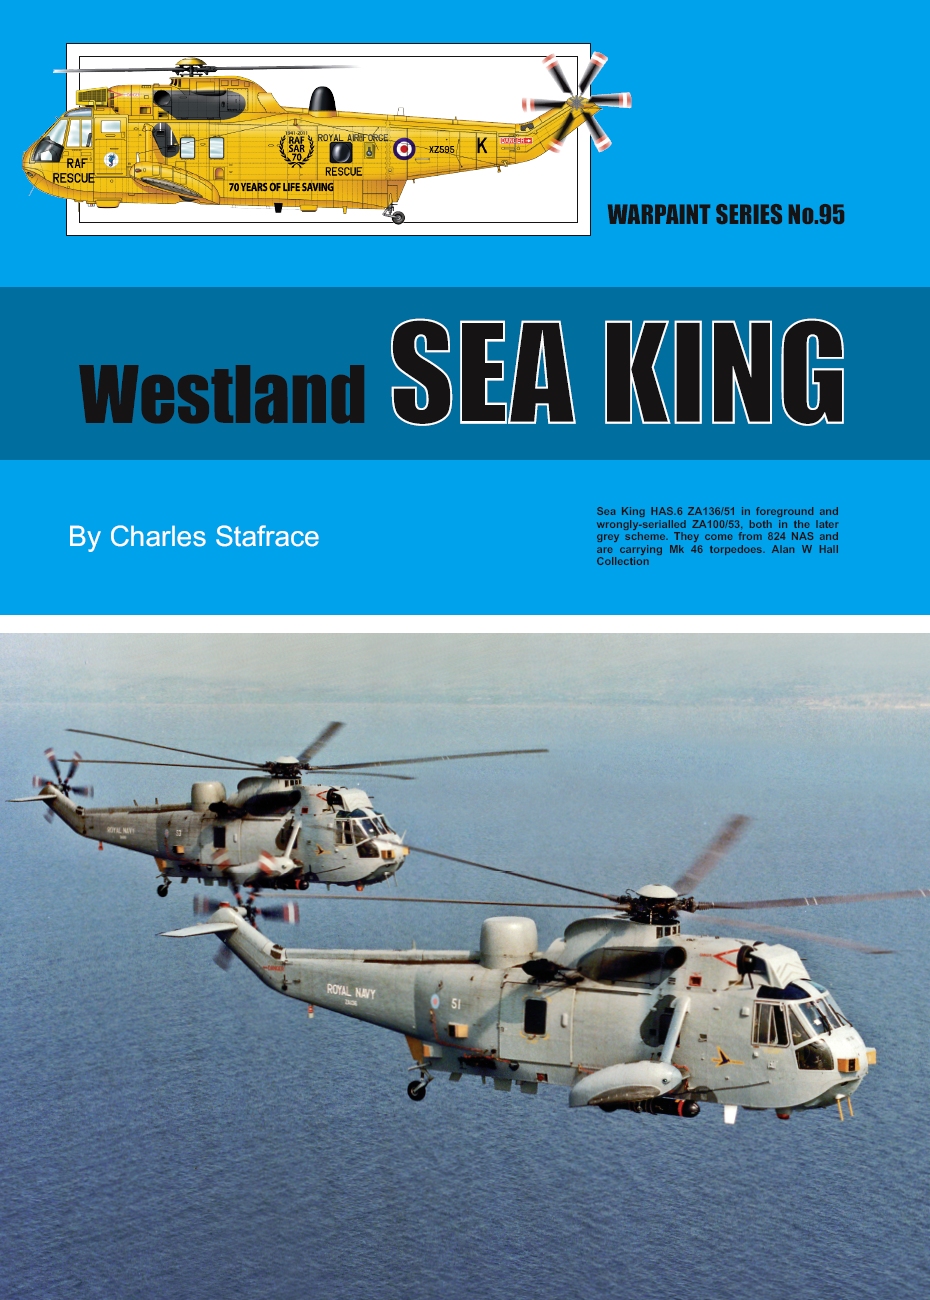 Guideline Publications Ltd No 95 Sea King No. 95 in the Warpaint series  